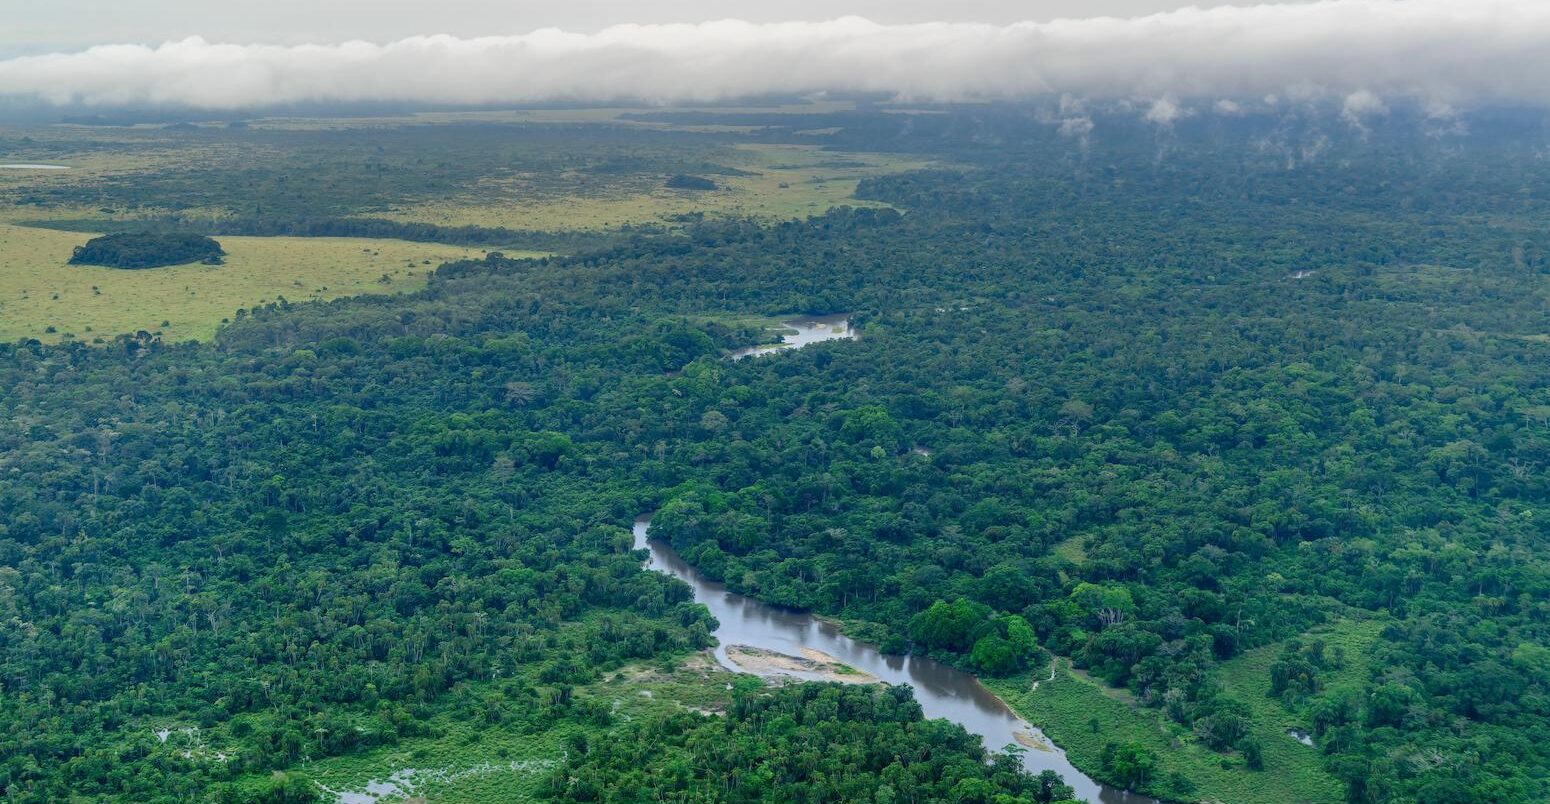 Aerial view of Odzala-Kokoua National Park in the Republic of the Congo.